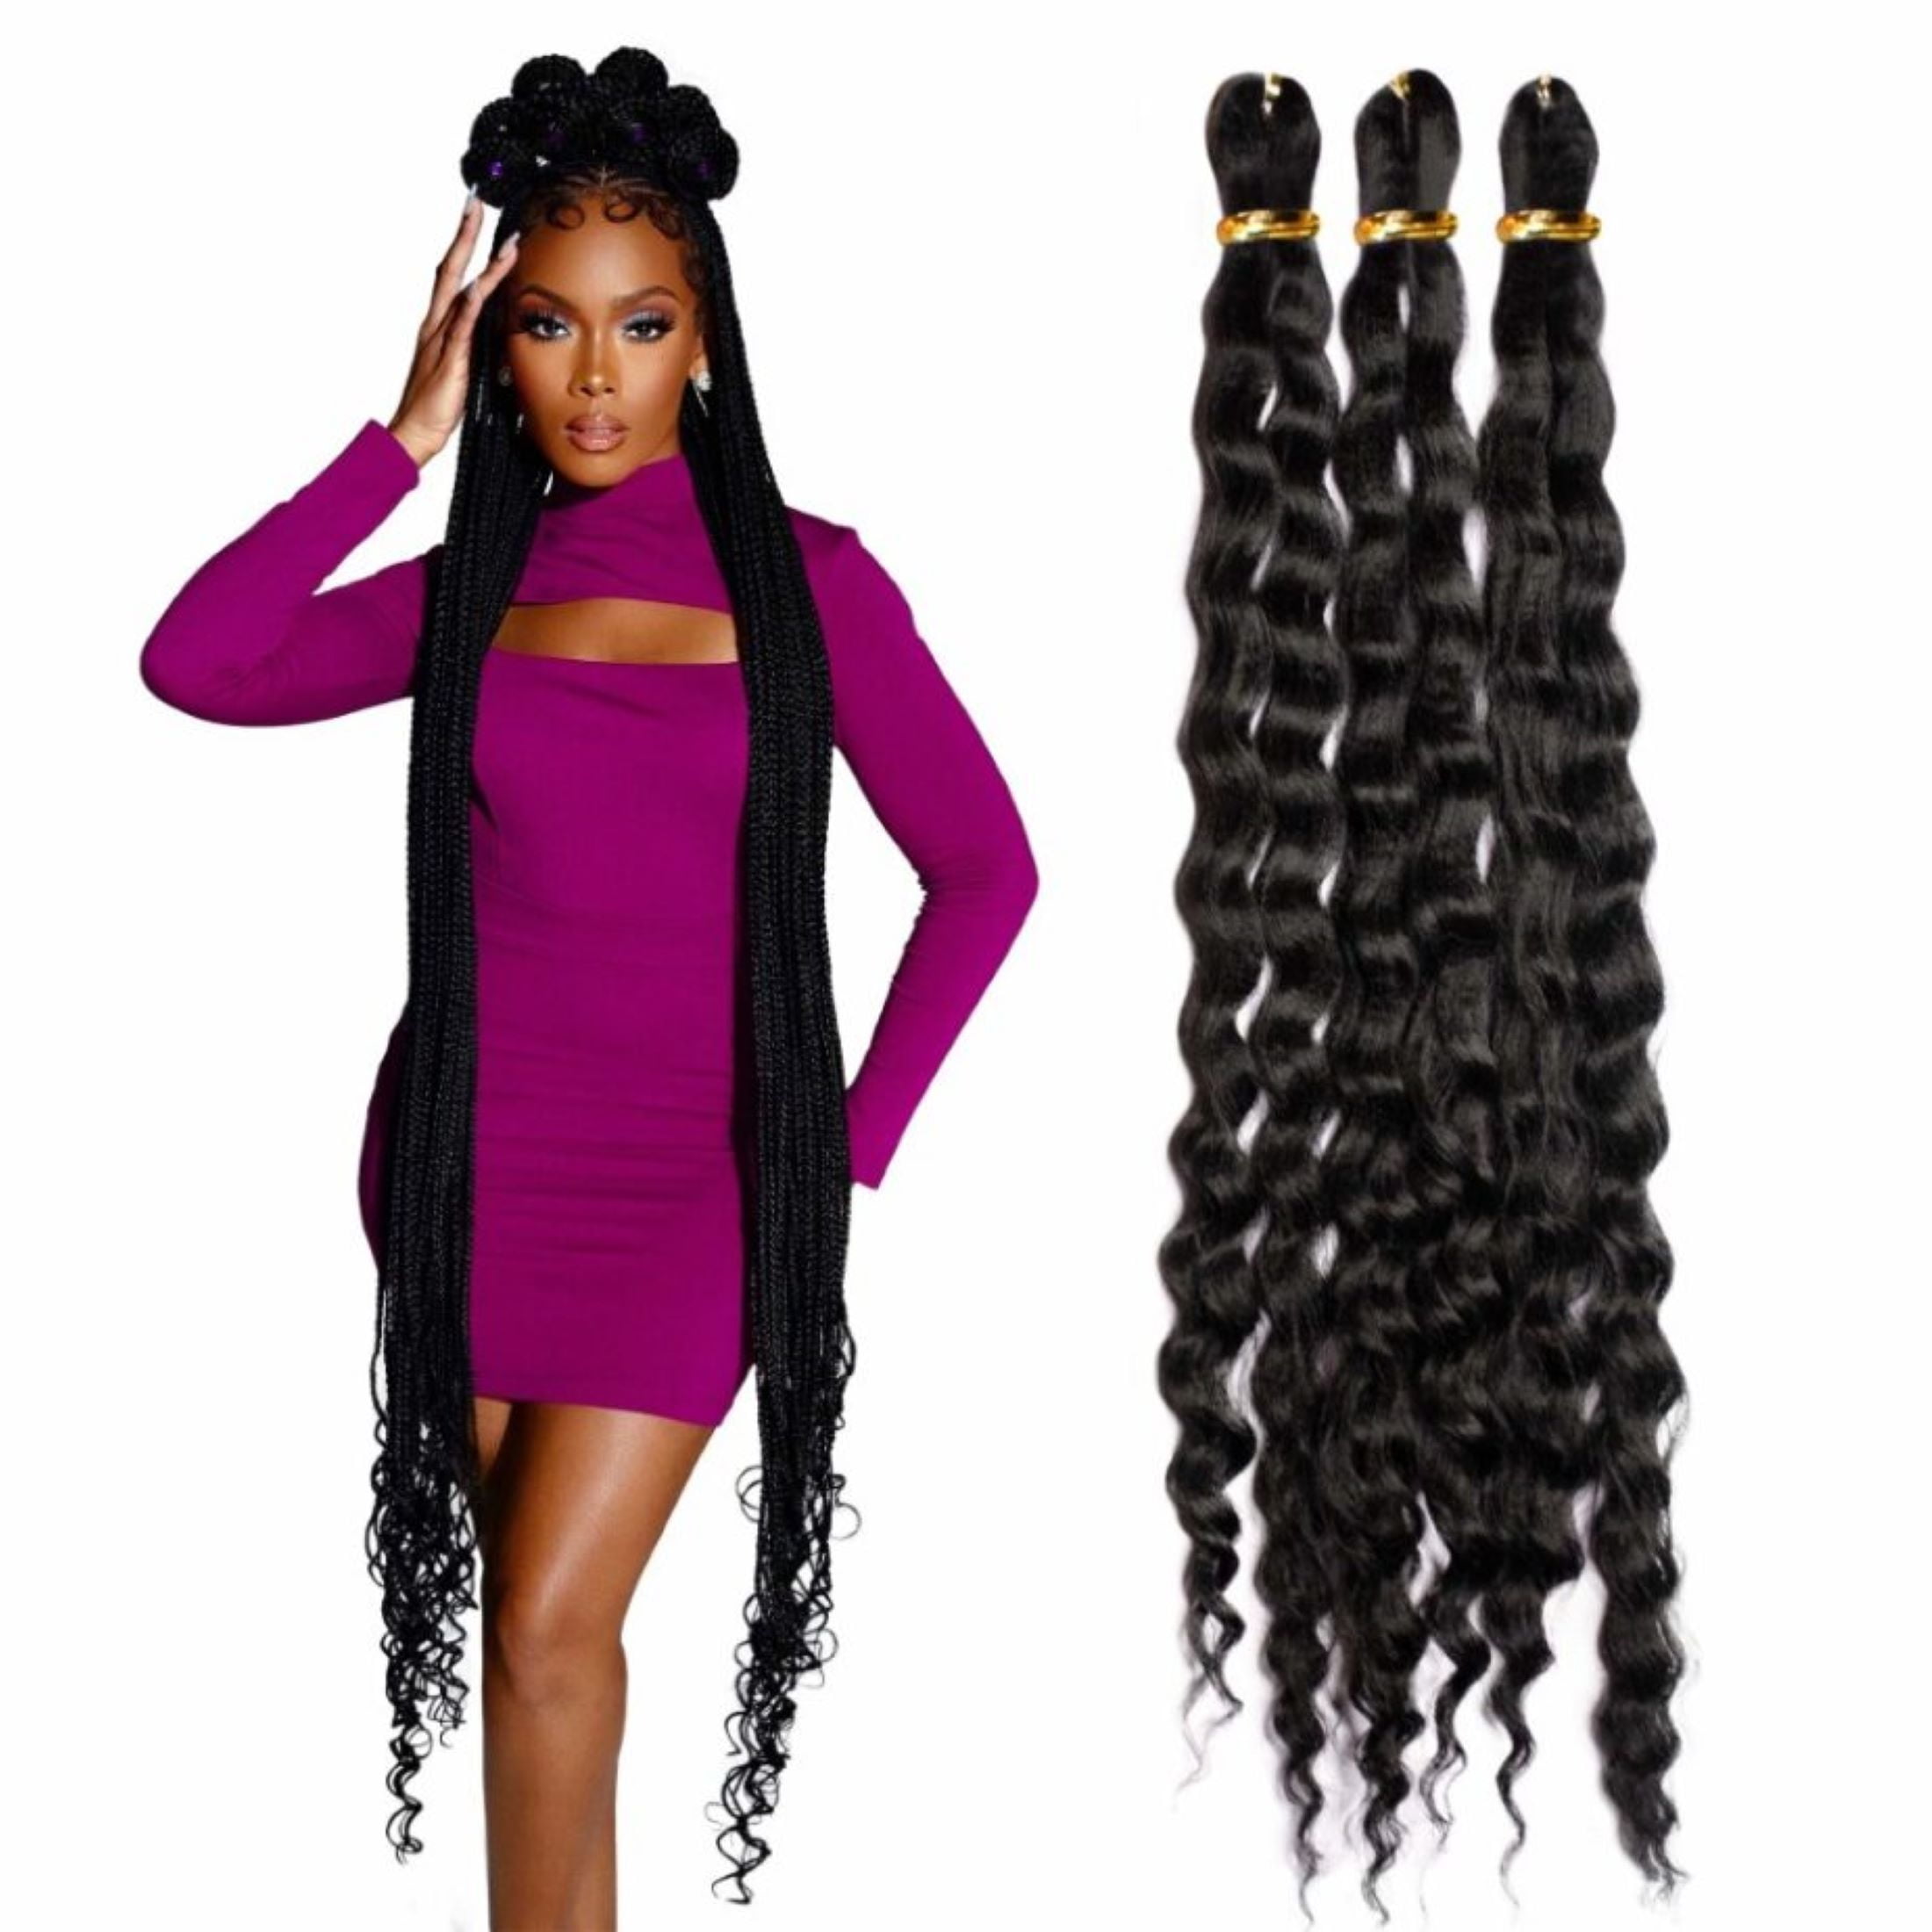 Darling Jungle Braid  Get Exclusive Deals only The Diva shop